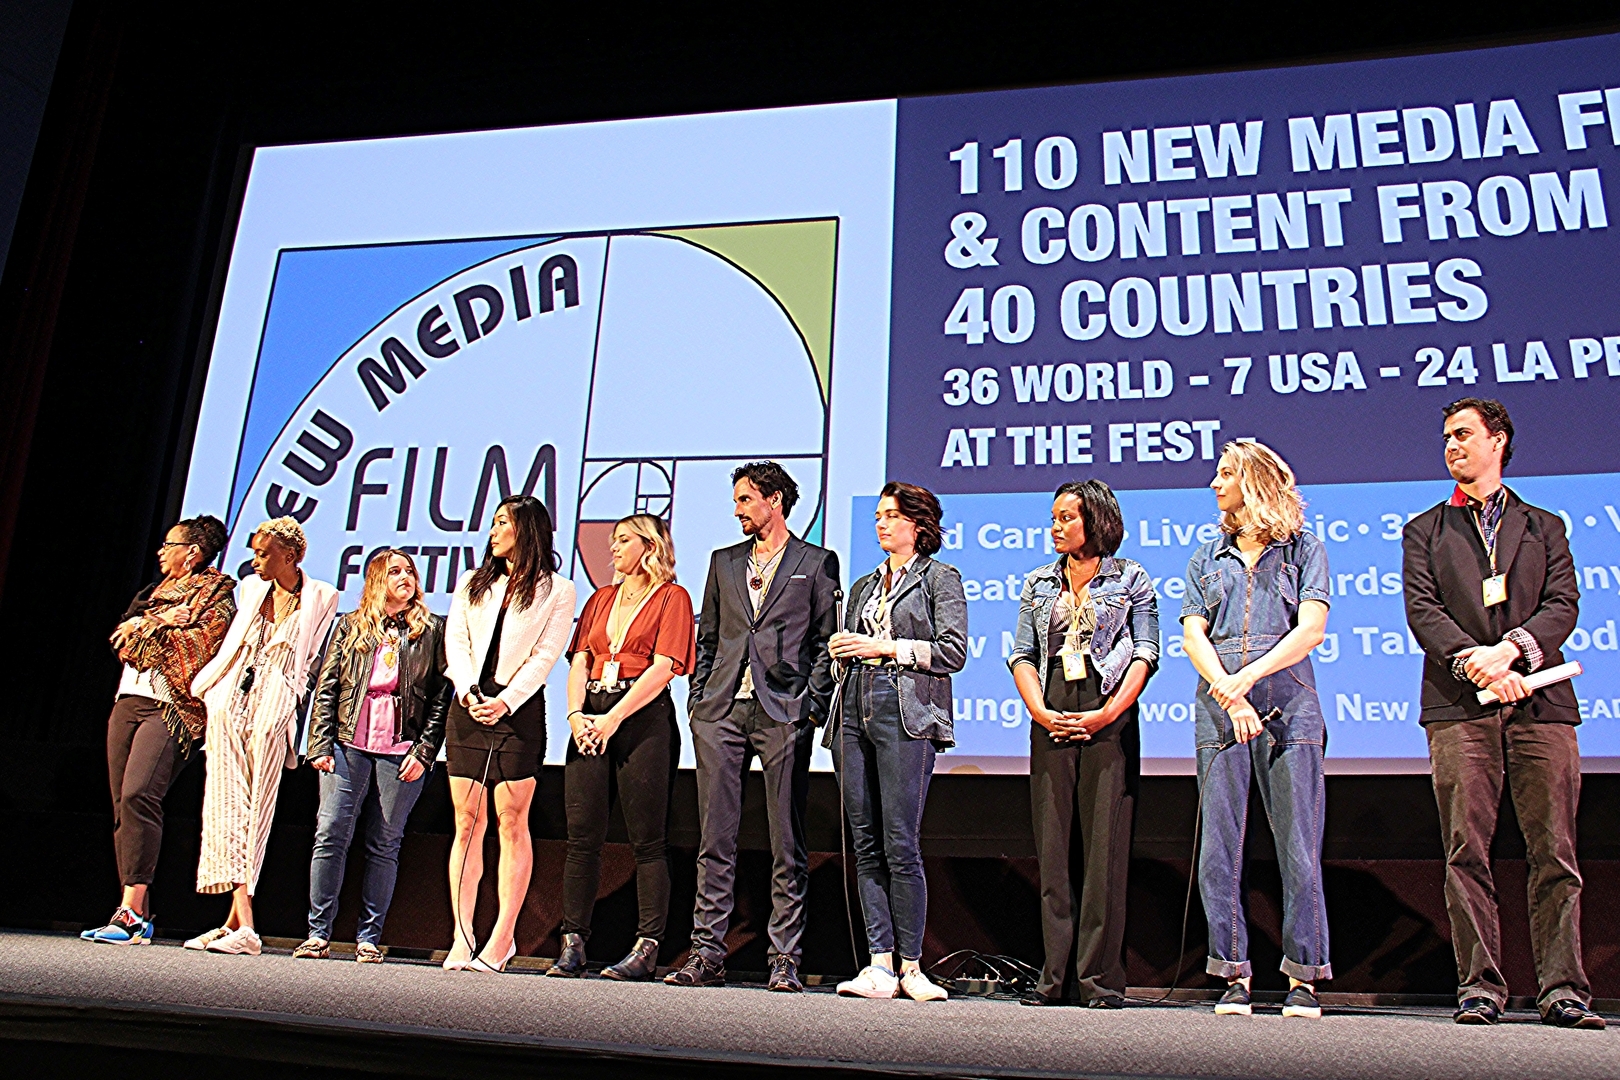 Story and Technology creators from 29 countries launch June 1-2 on a global stage, New Media Film Fest, Los Angeles, California, United States